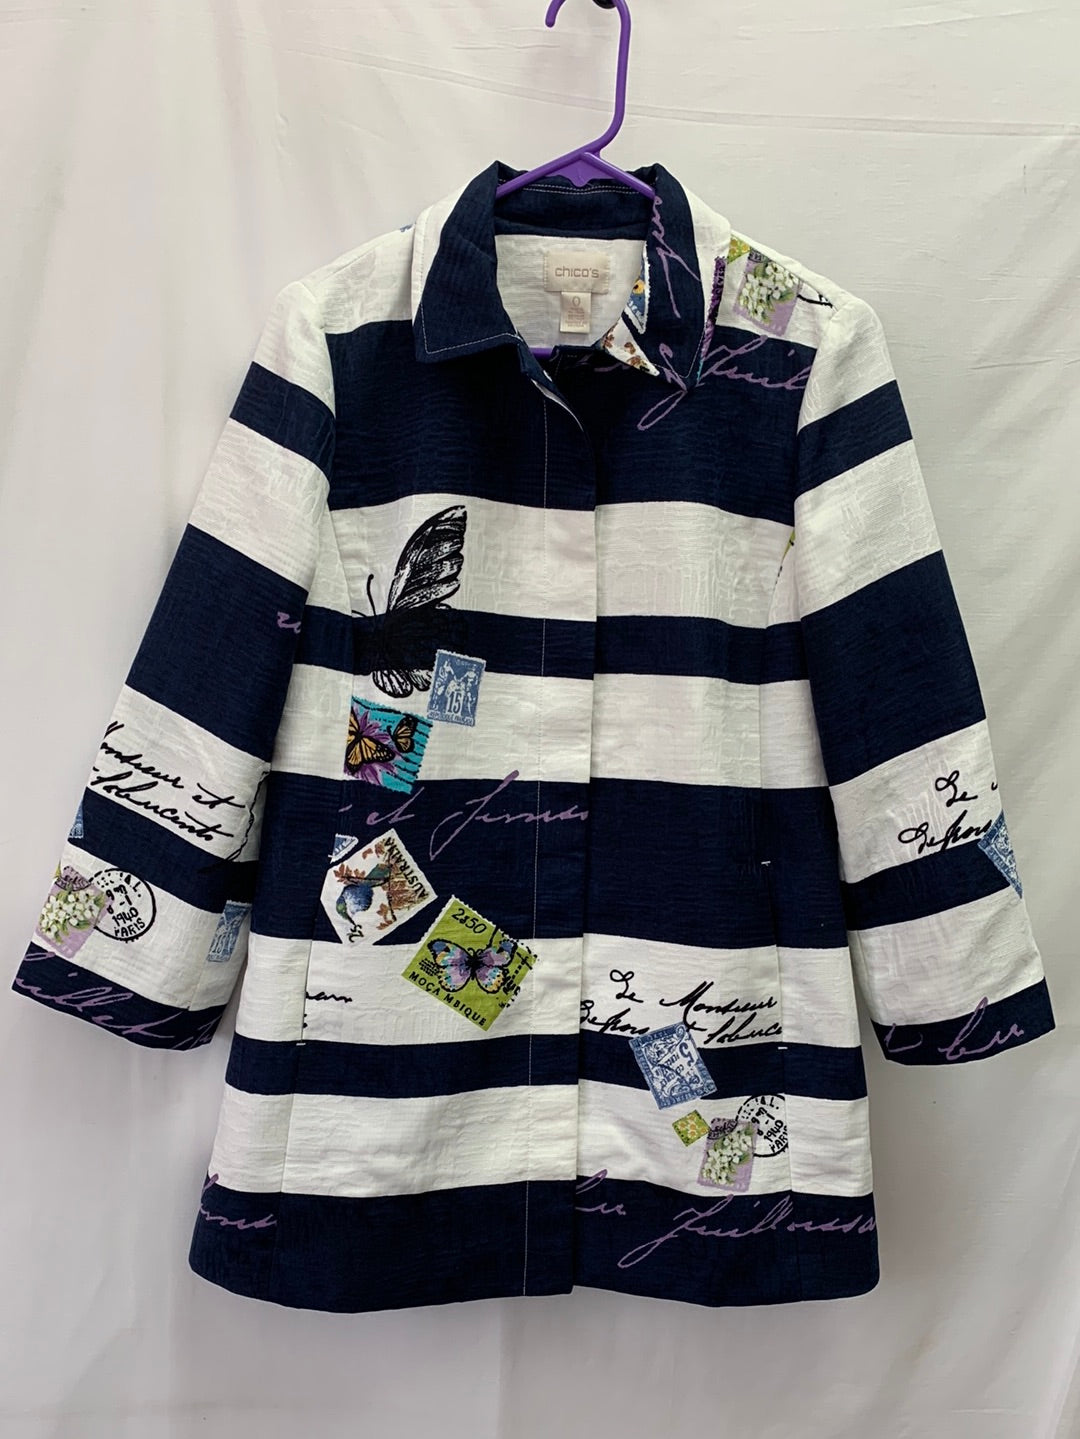 NWT - CHICO'S navy stripe Postcard Butterfly 3/4 Sleeve Jacket - 0 (S 4/6)